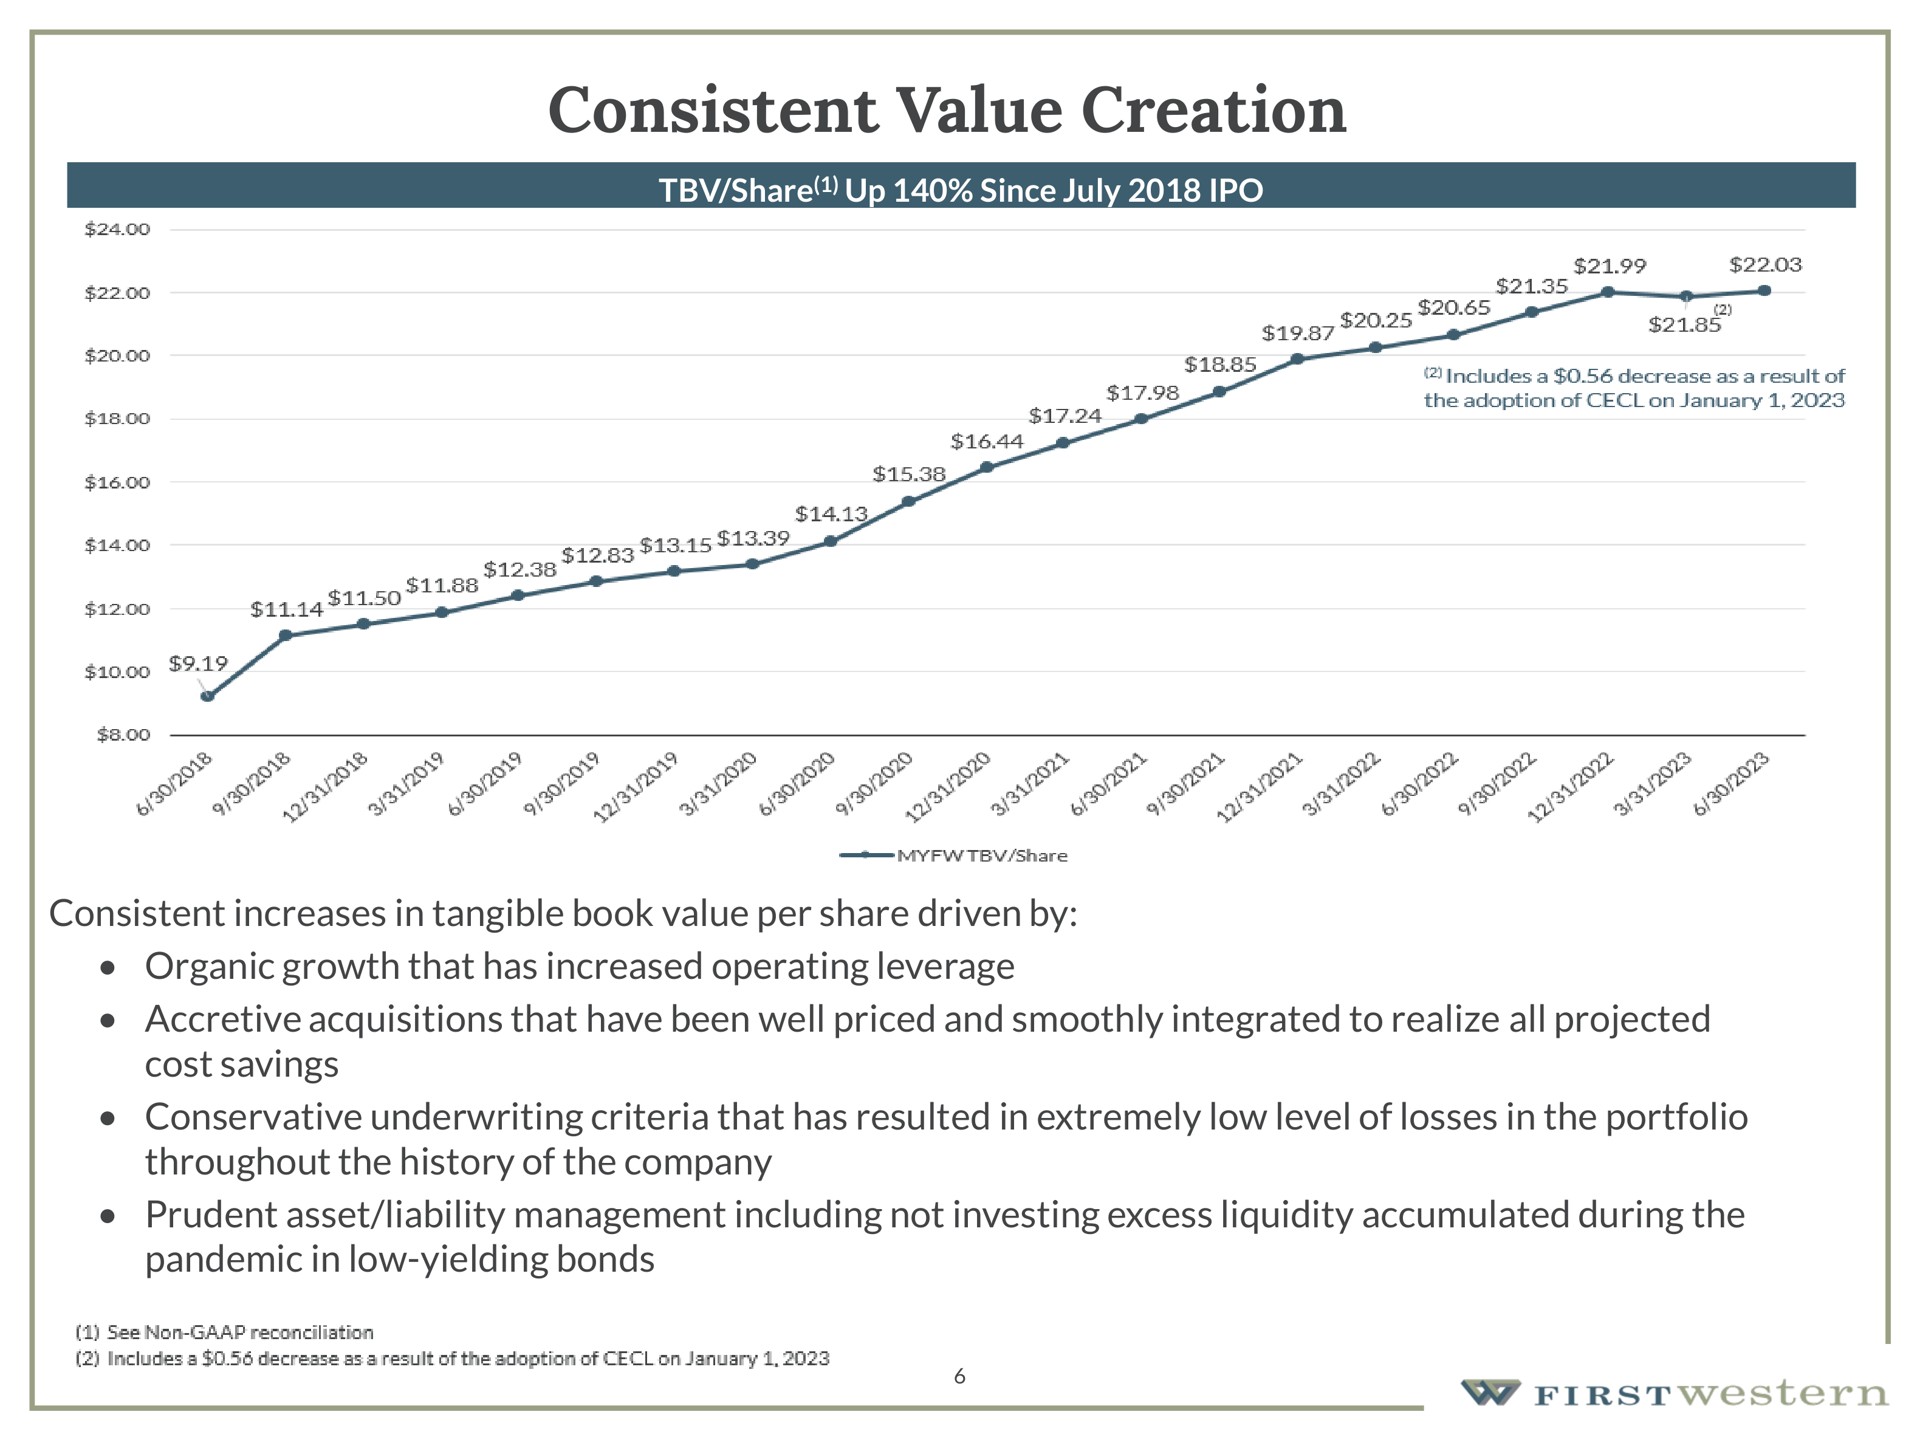 consistent value creation consistent increases in tangible book value per share driven by organic growth that has increased operating leverage accretive acquisitions that have been well priced and smoothly integrated to realize all projected cost savings conservative underwriting criteria that has resulted in extremely low level of losses in the portfolio throughout the history of the company prudent asset liability management including not investing excess liquidity accumulated during the pandemic in low yielding bonds | First Western Financial